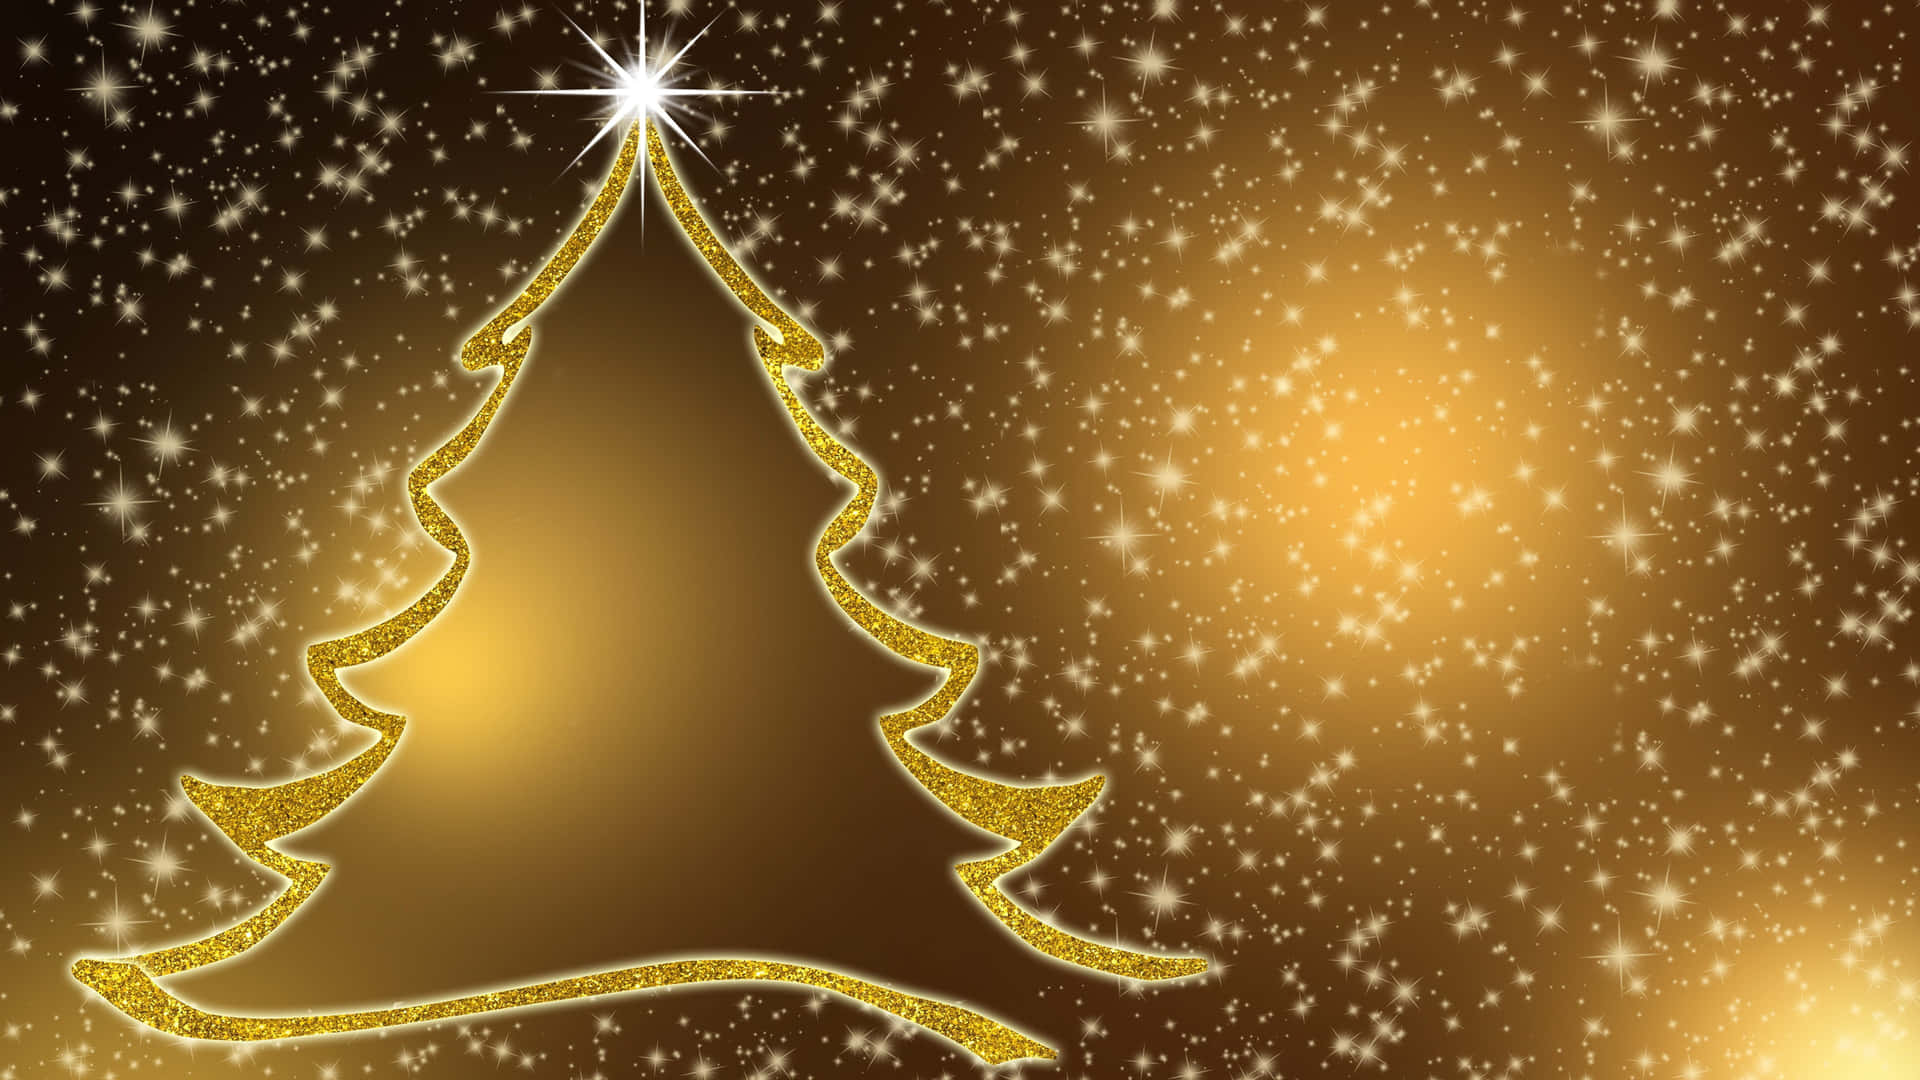 A Golden Christmas Tree On A Black Background